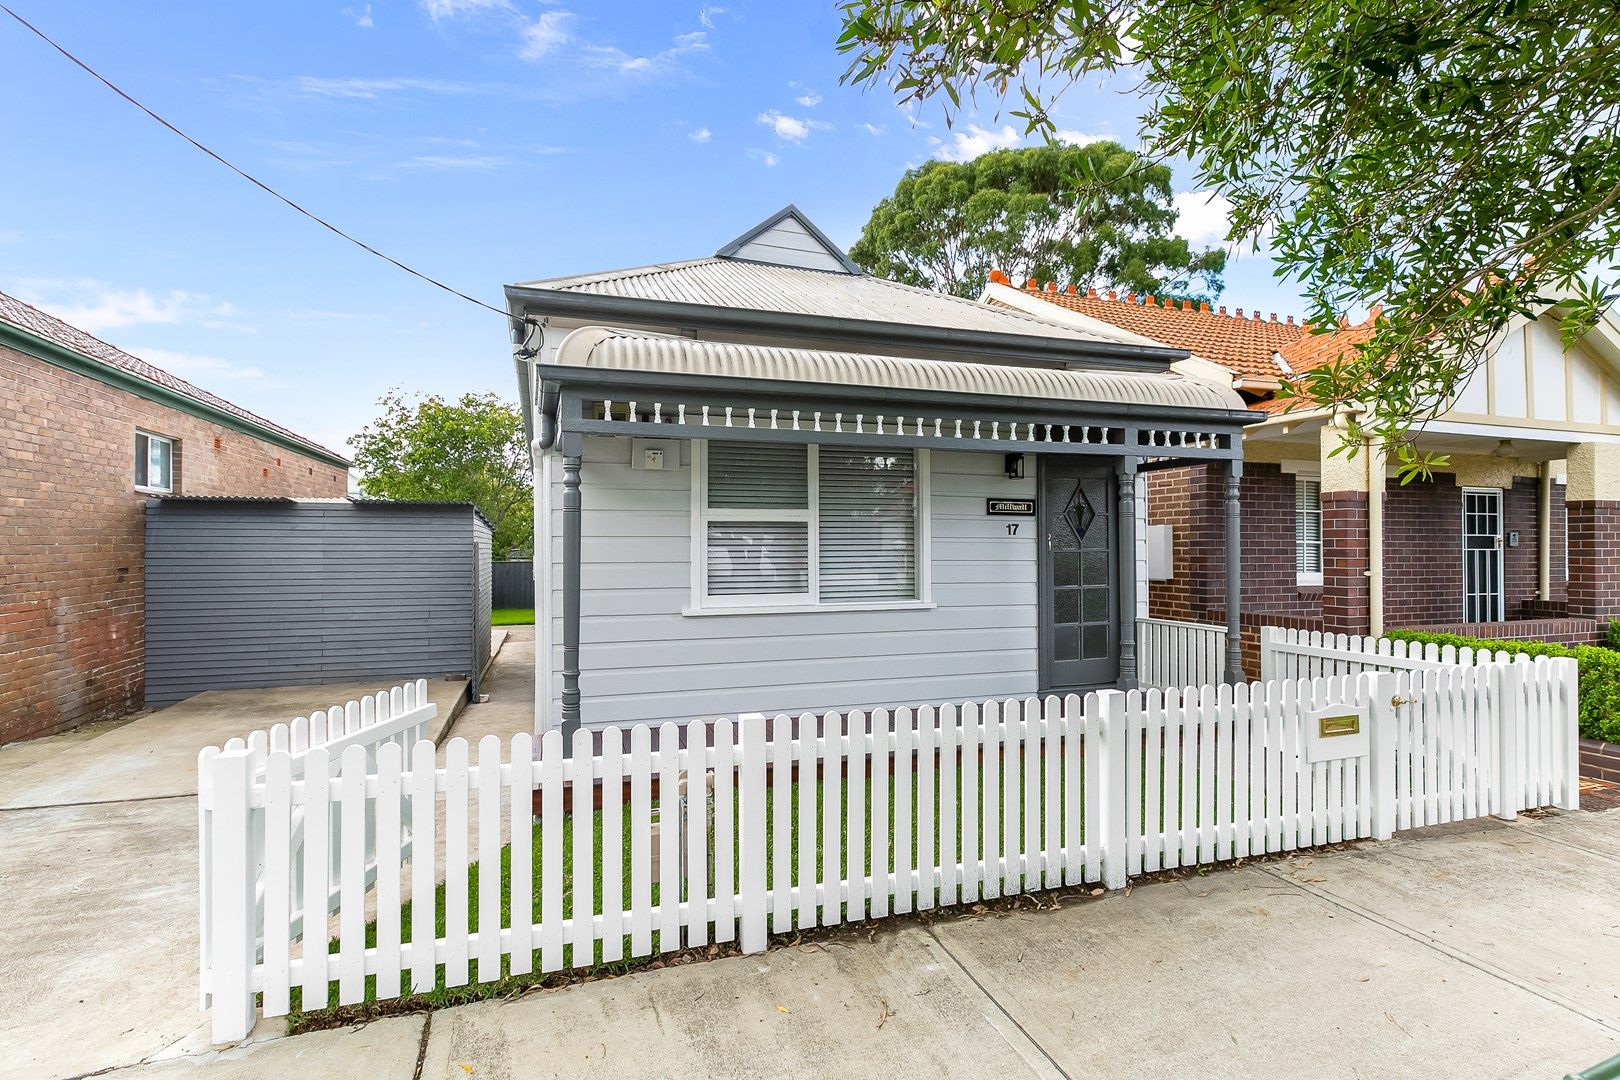 2 bedrooms House in 17 Paling Street LILYFIELD NSW, 2040